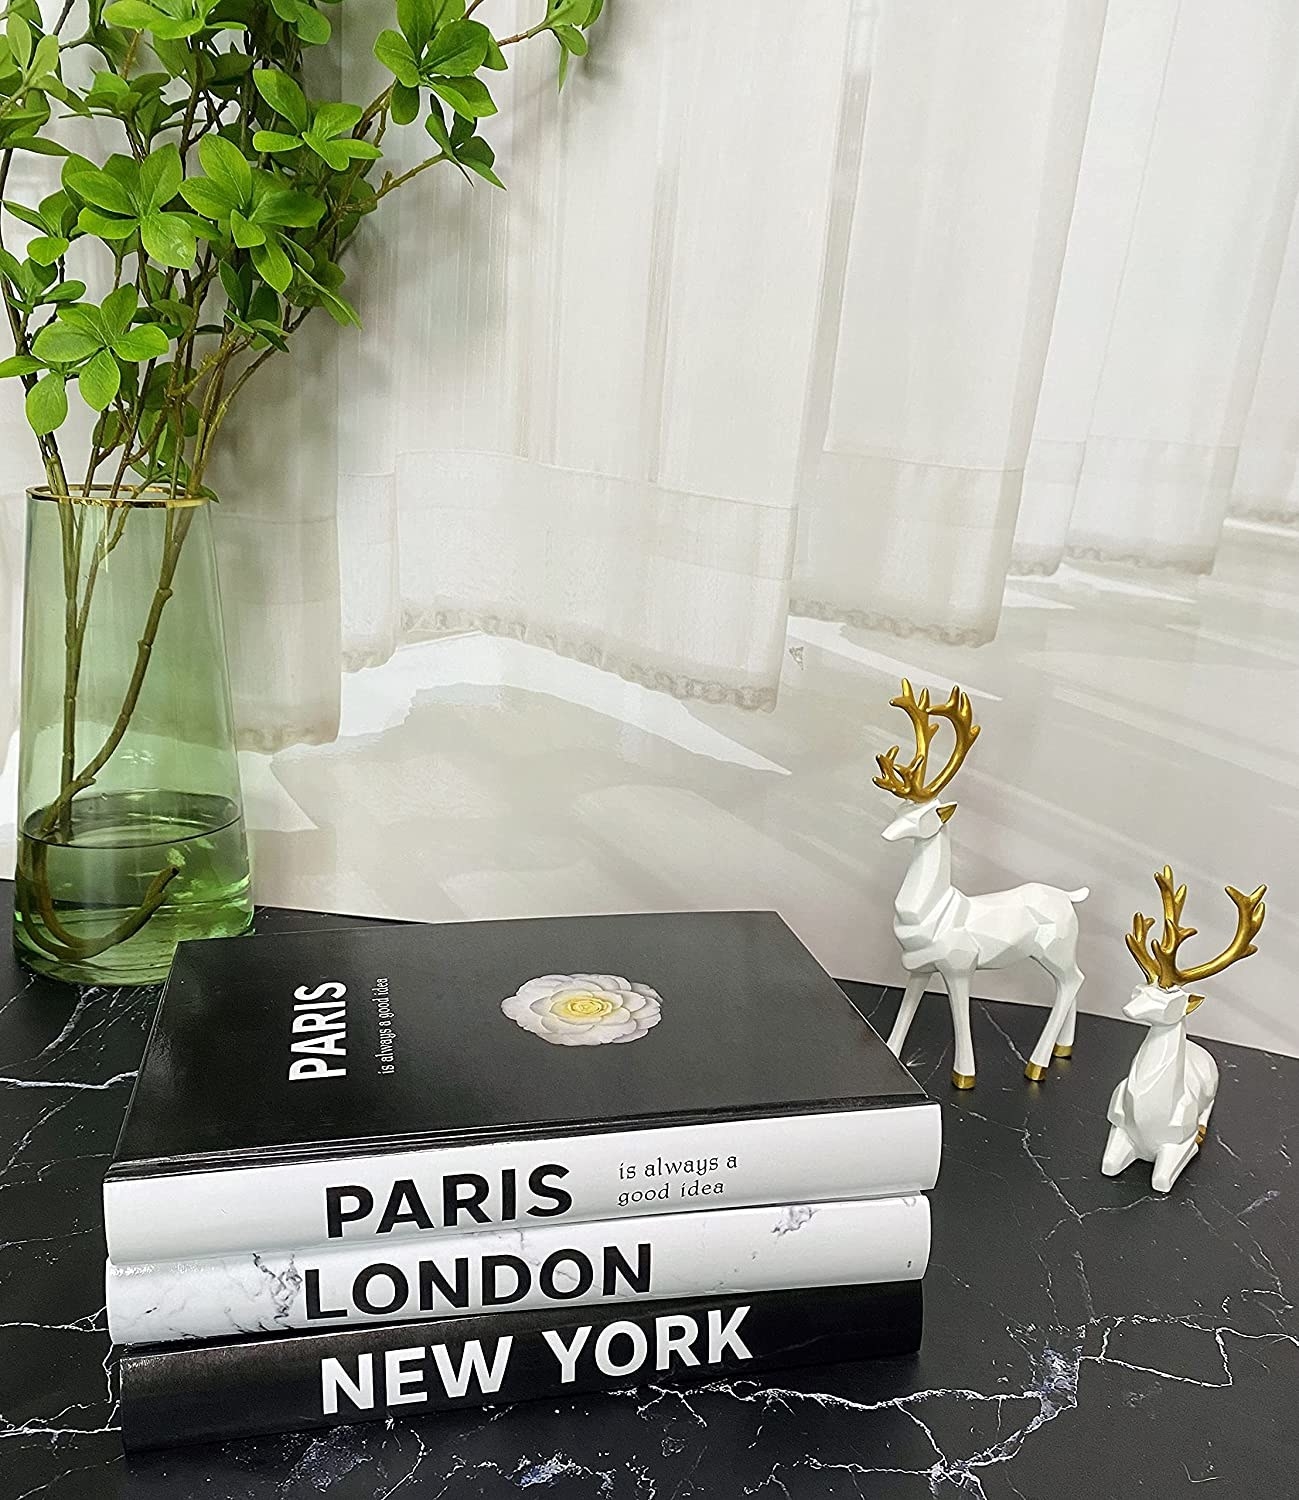 the three books that say &quot;paris&quot; &quot;london&quot; and &quot;new york&quot; stacked on a counter with two ceramic deer standing next to them